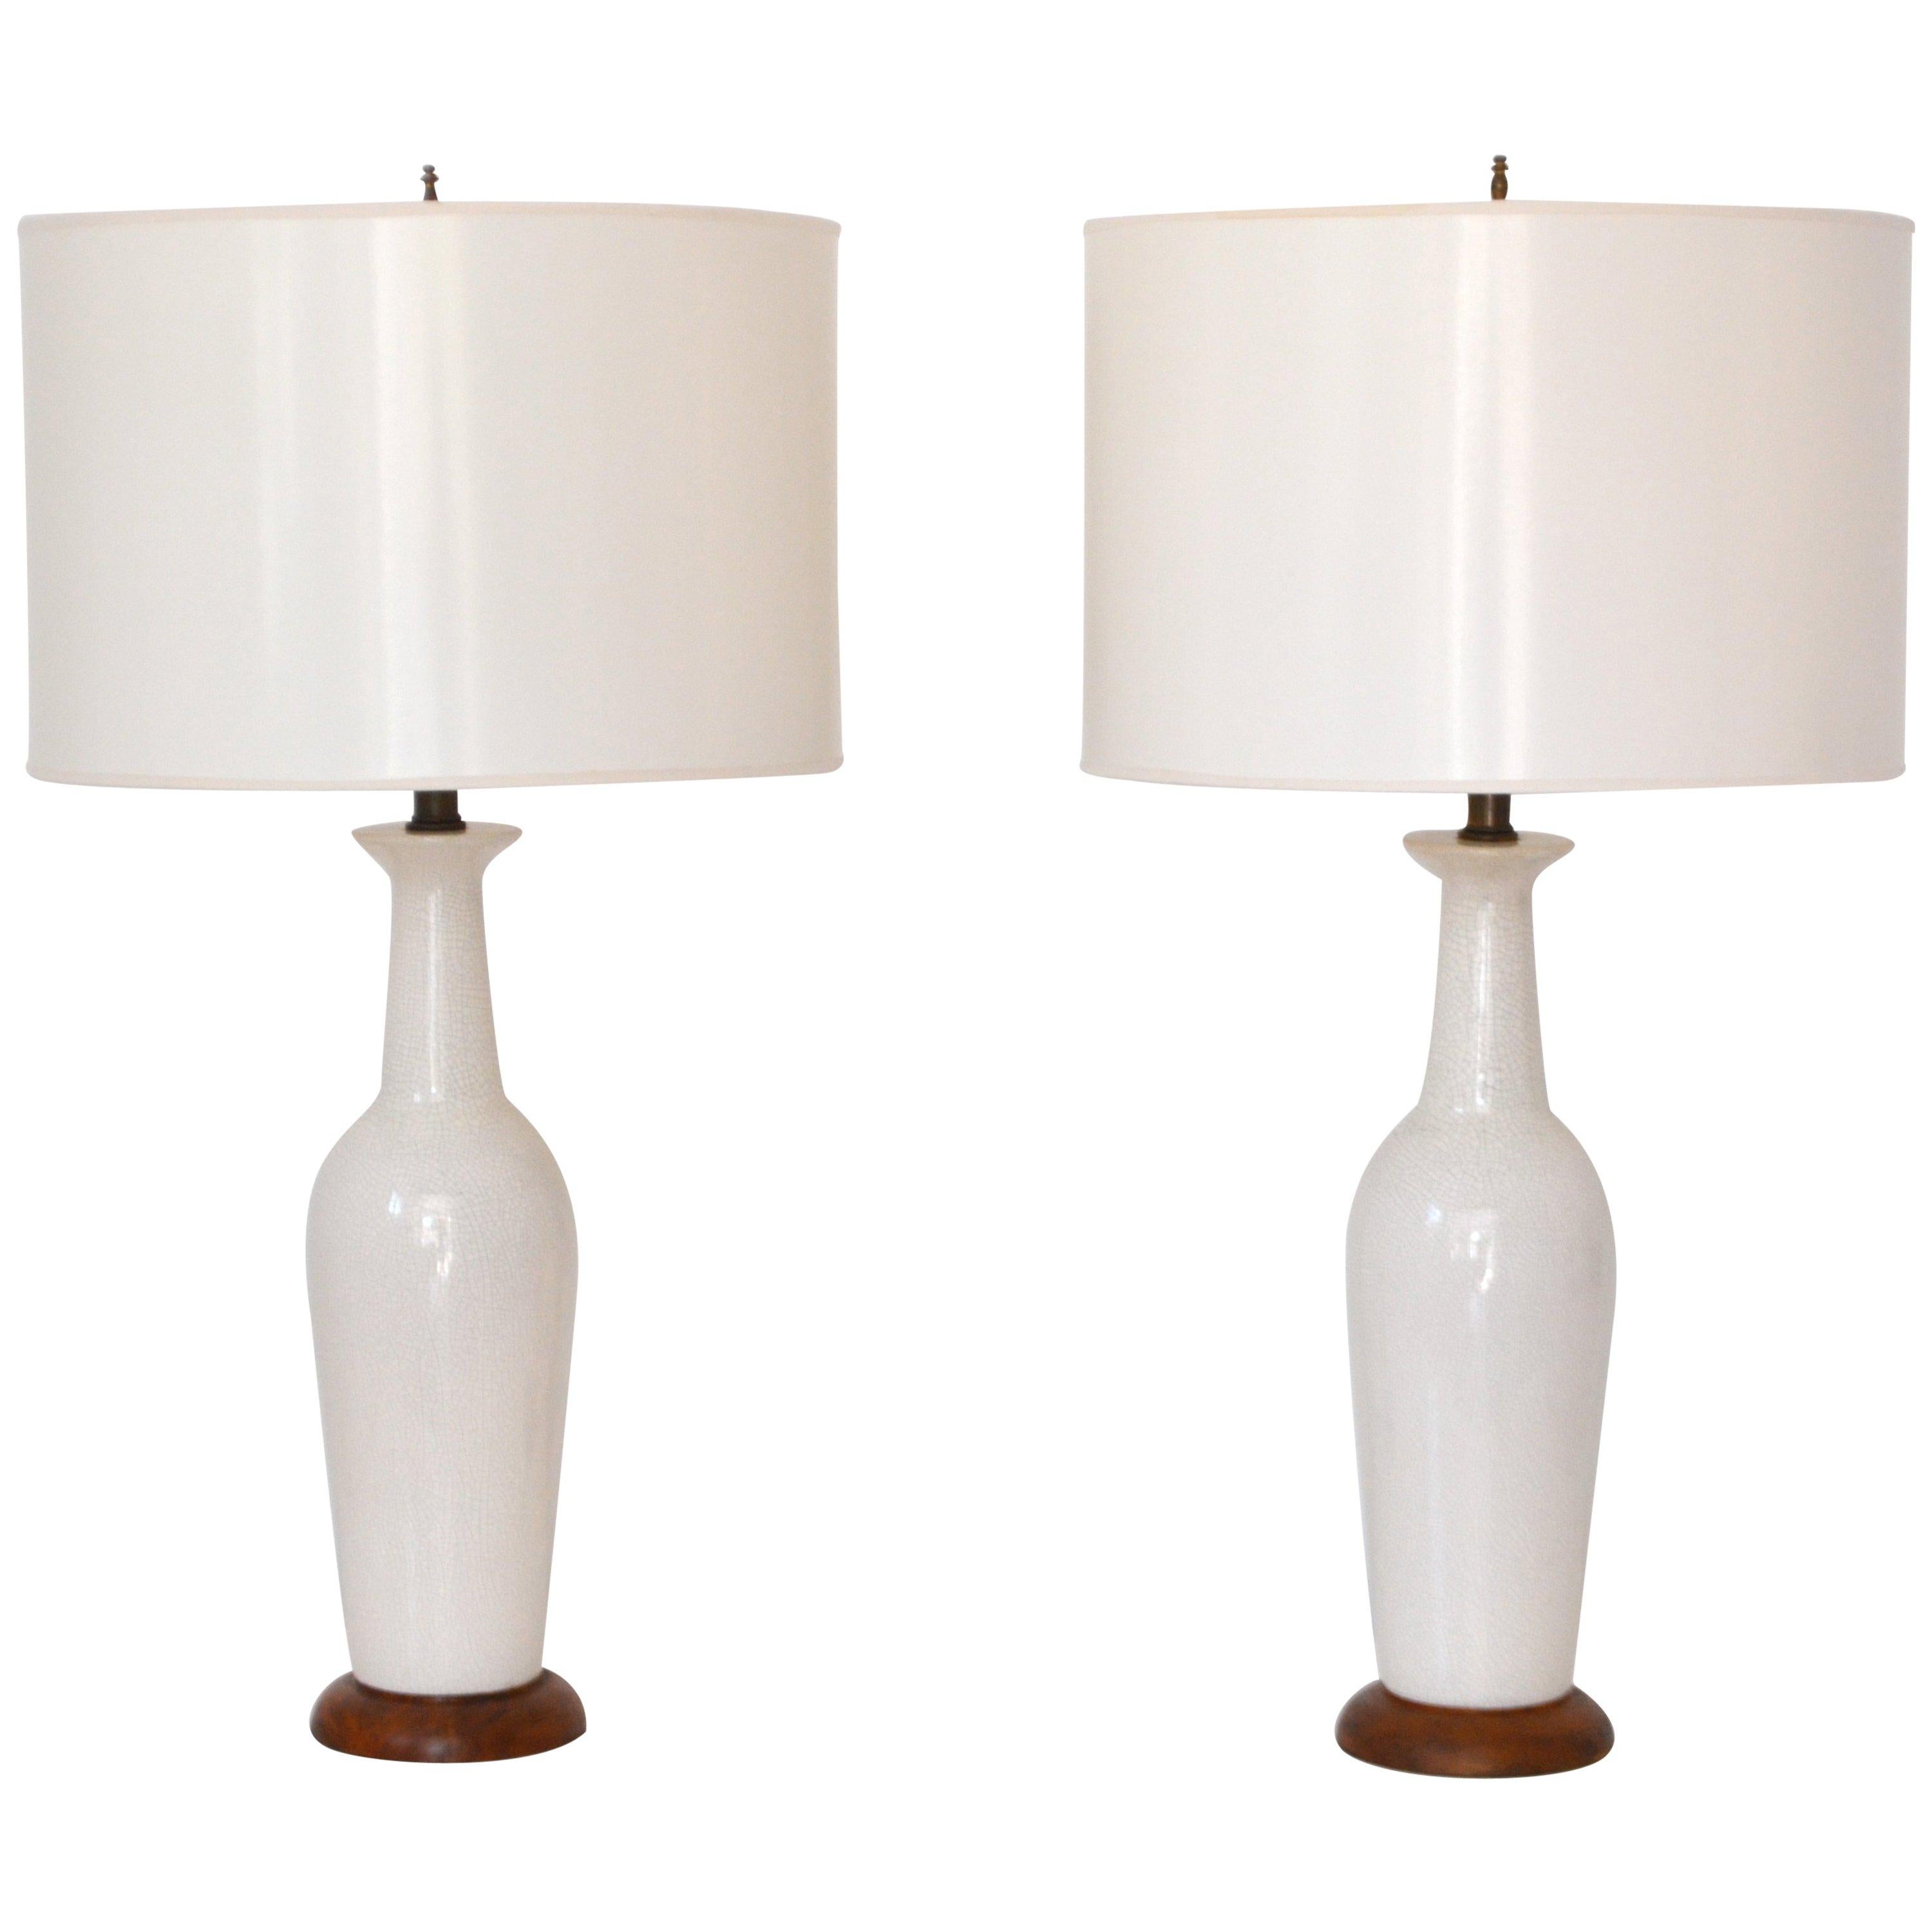 Pair of Midcentury Crackle Glazed Ceramic Bottle Form Table Lamps For Sale